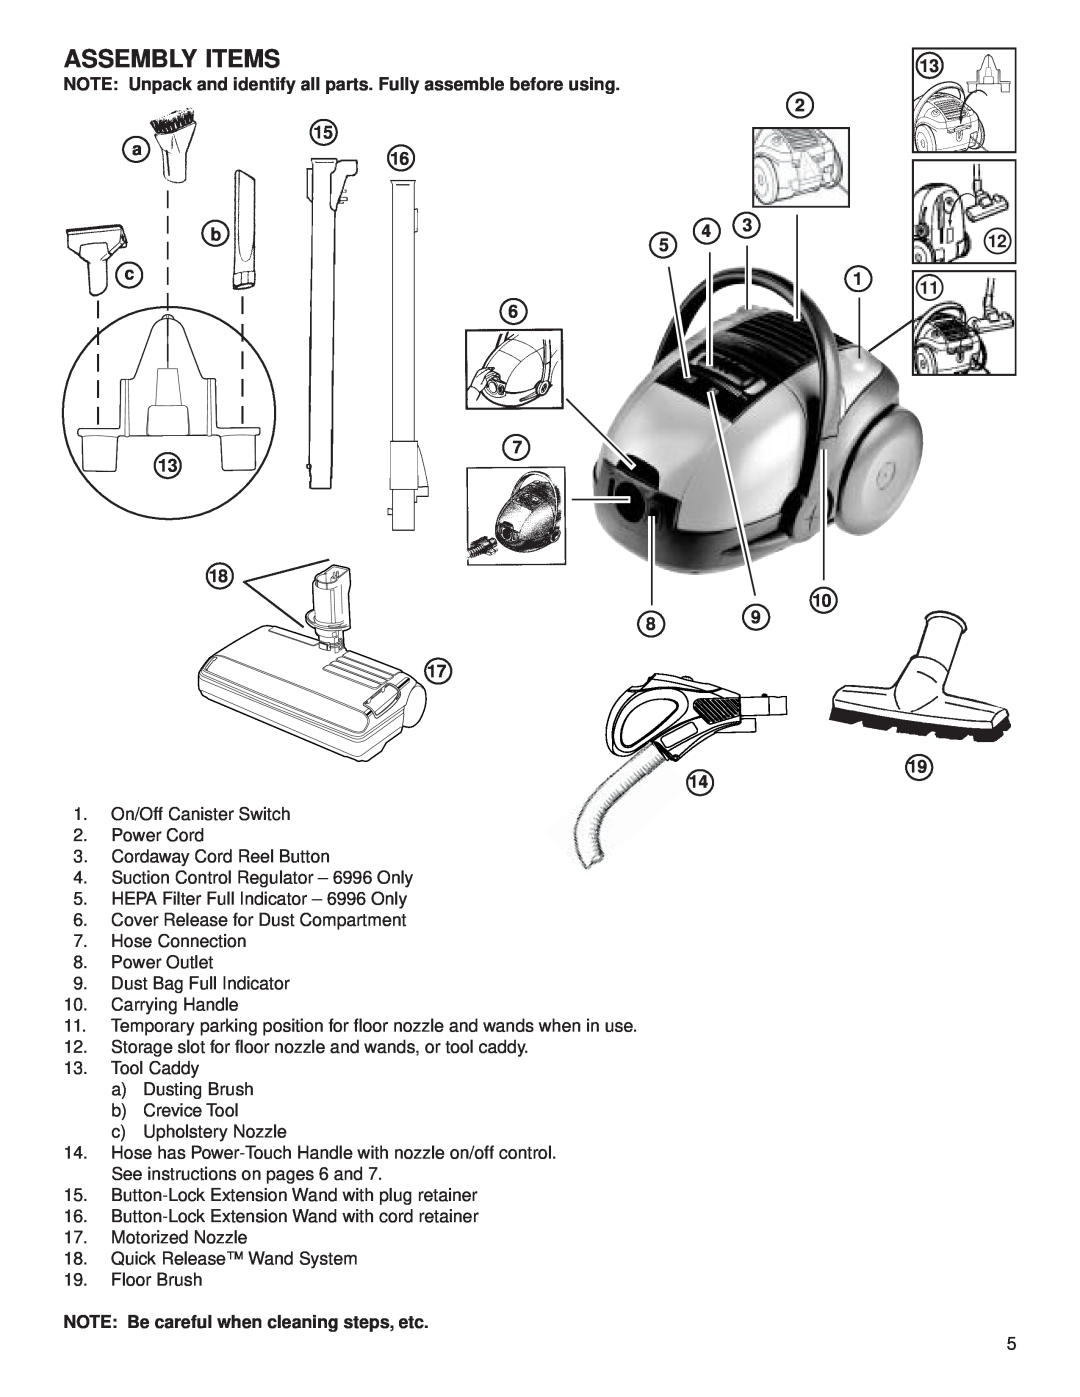 Eureka 6992 warranty Assembly Items, NOTE Unpack and identify all parts. Fully assemble before using 